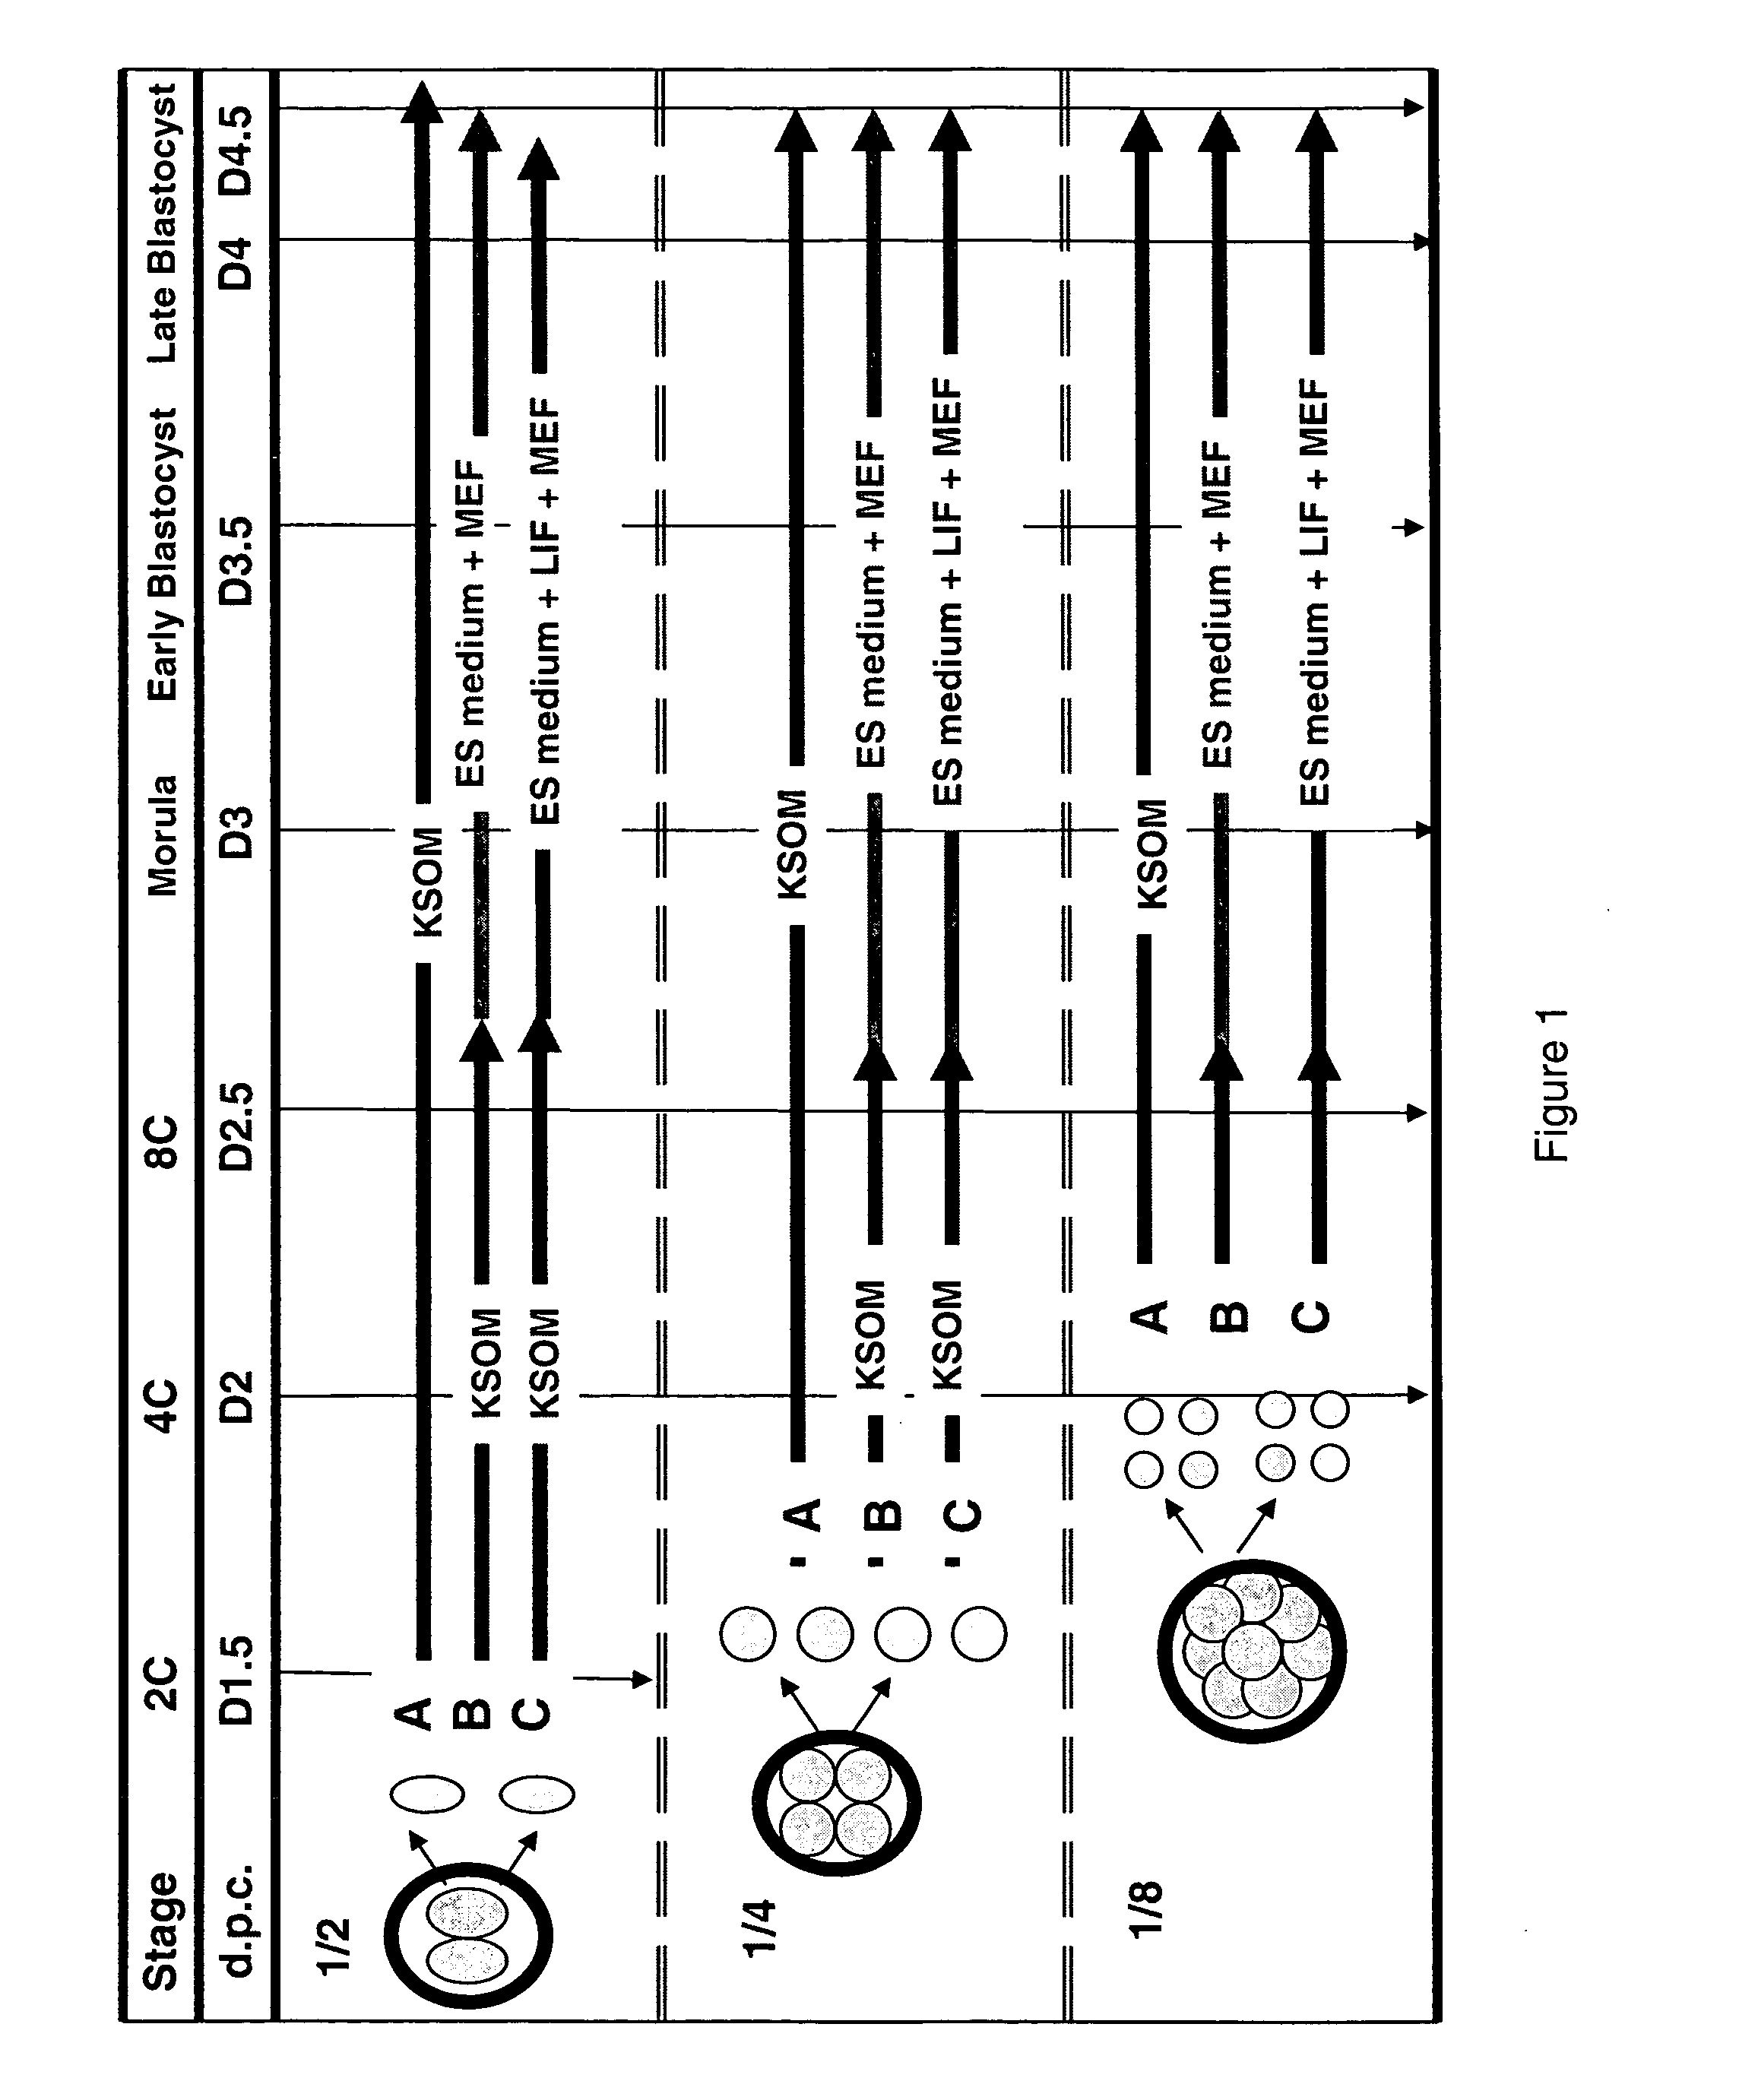 Method of deriving pluripotent stem cells from a single blastomere